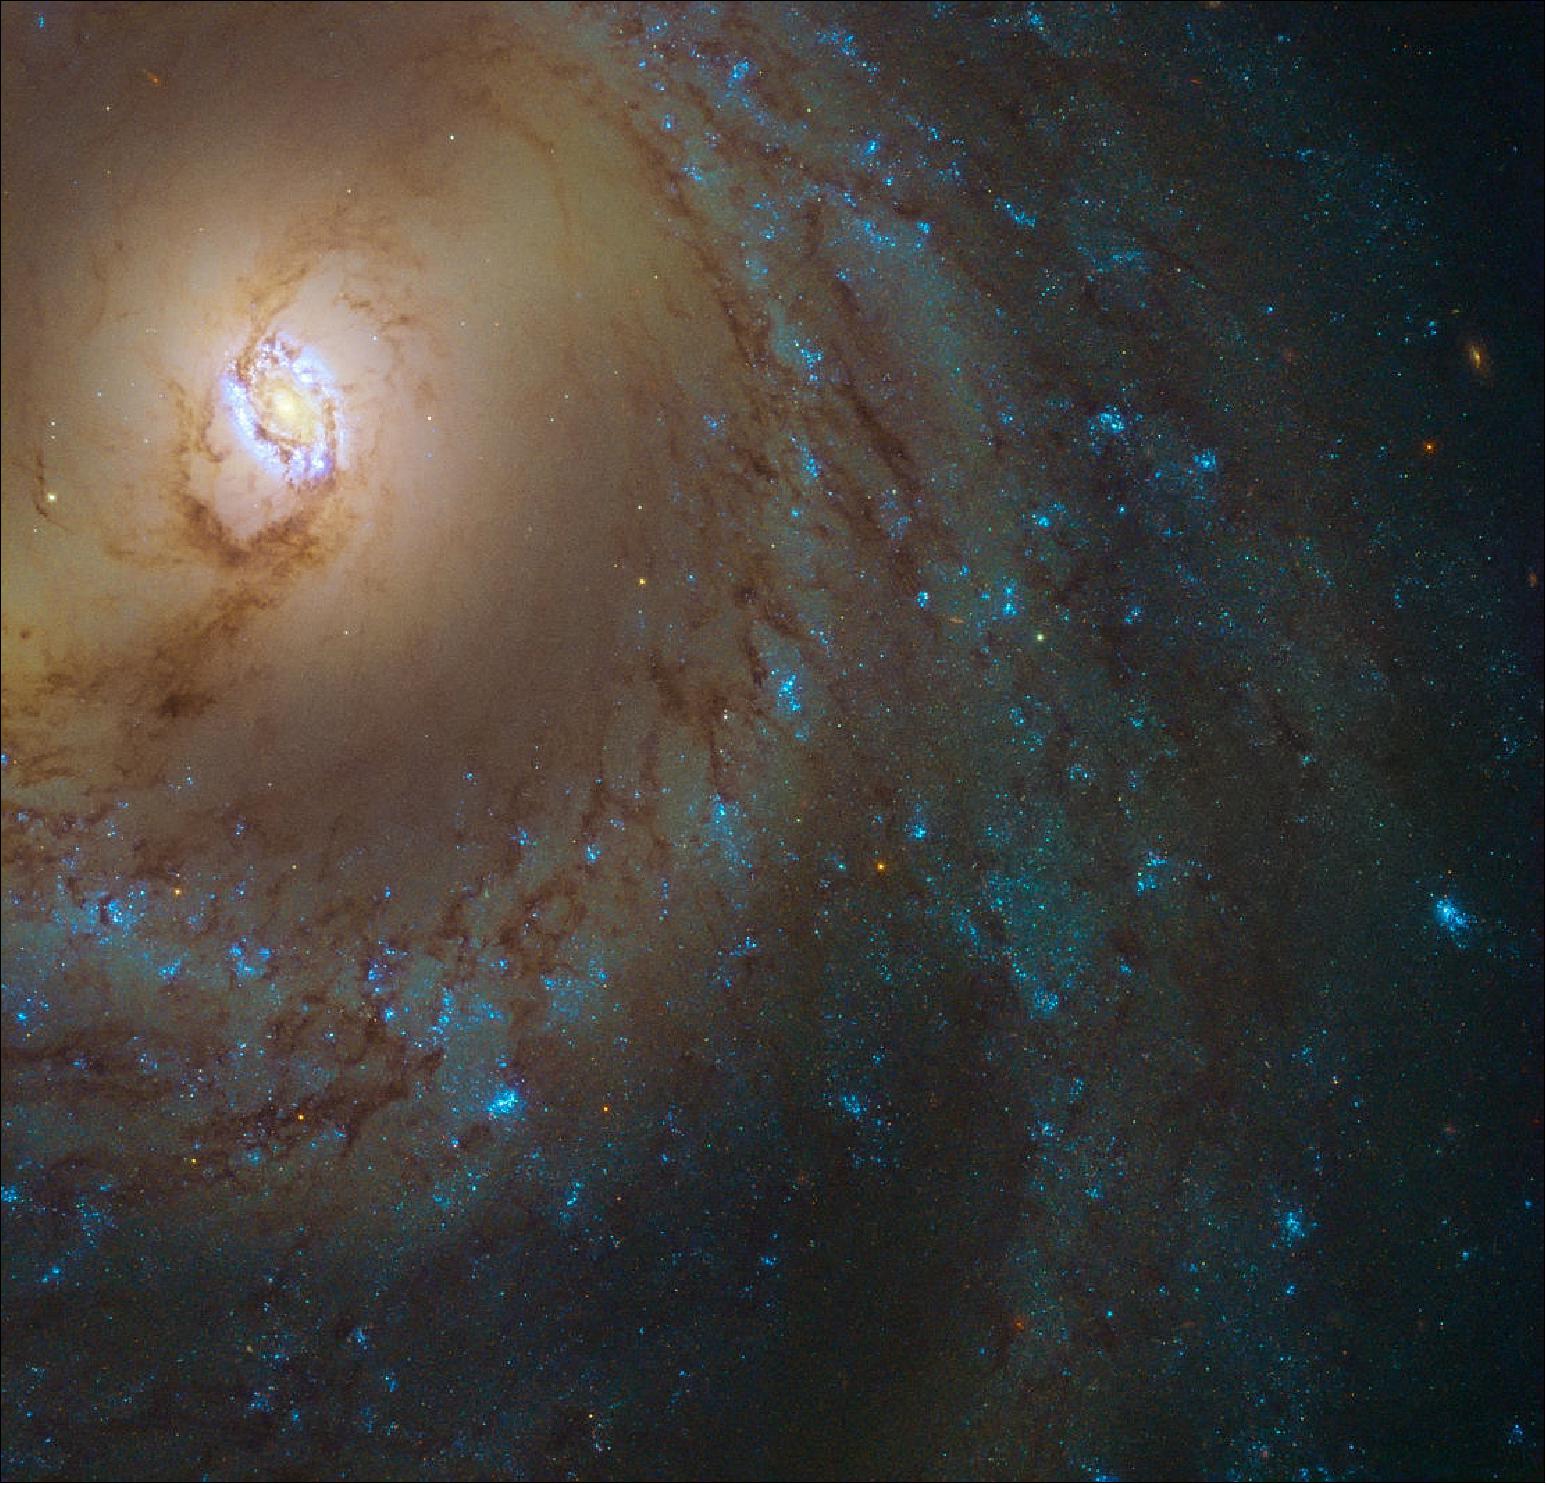 Figure 17: This Hubble image reveals a detailed view of part of the spiral galaxy Messier 95 (image credit: ESA/Hubble & NASA; CC BY 4.0)